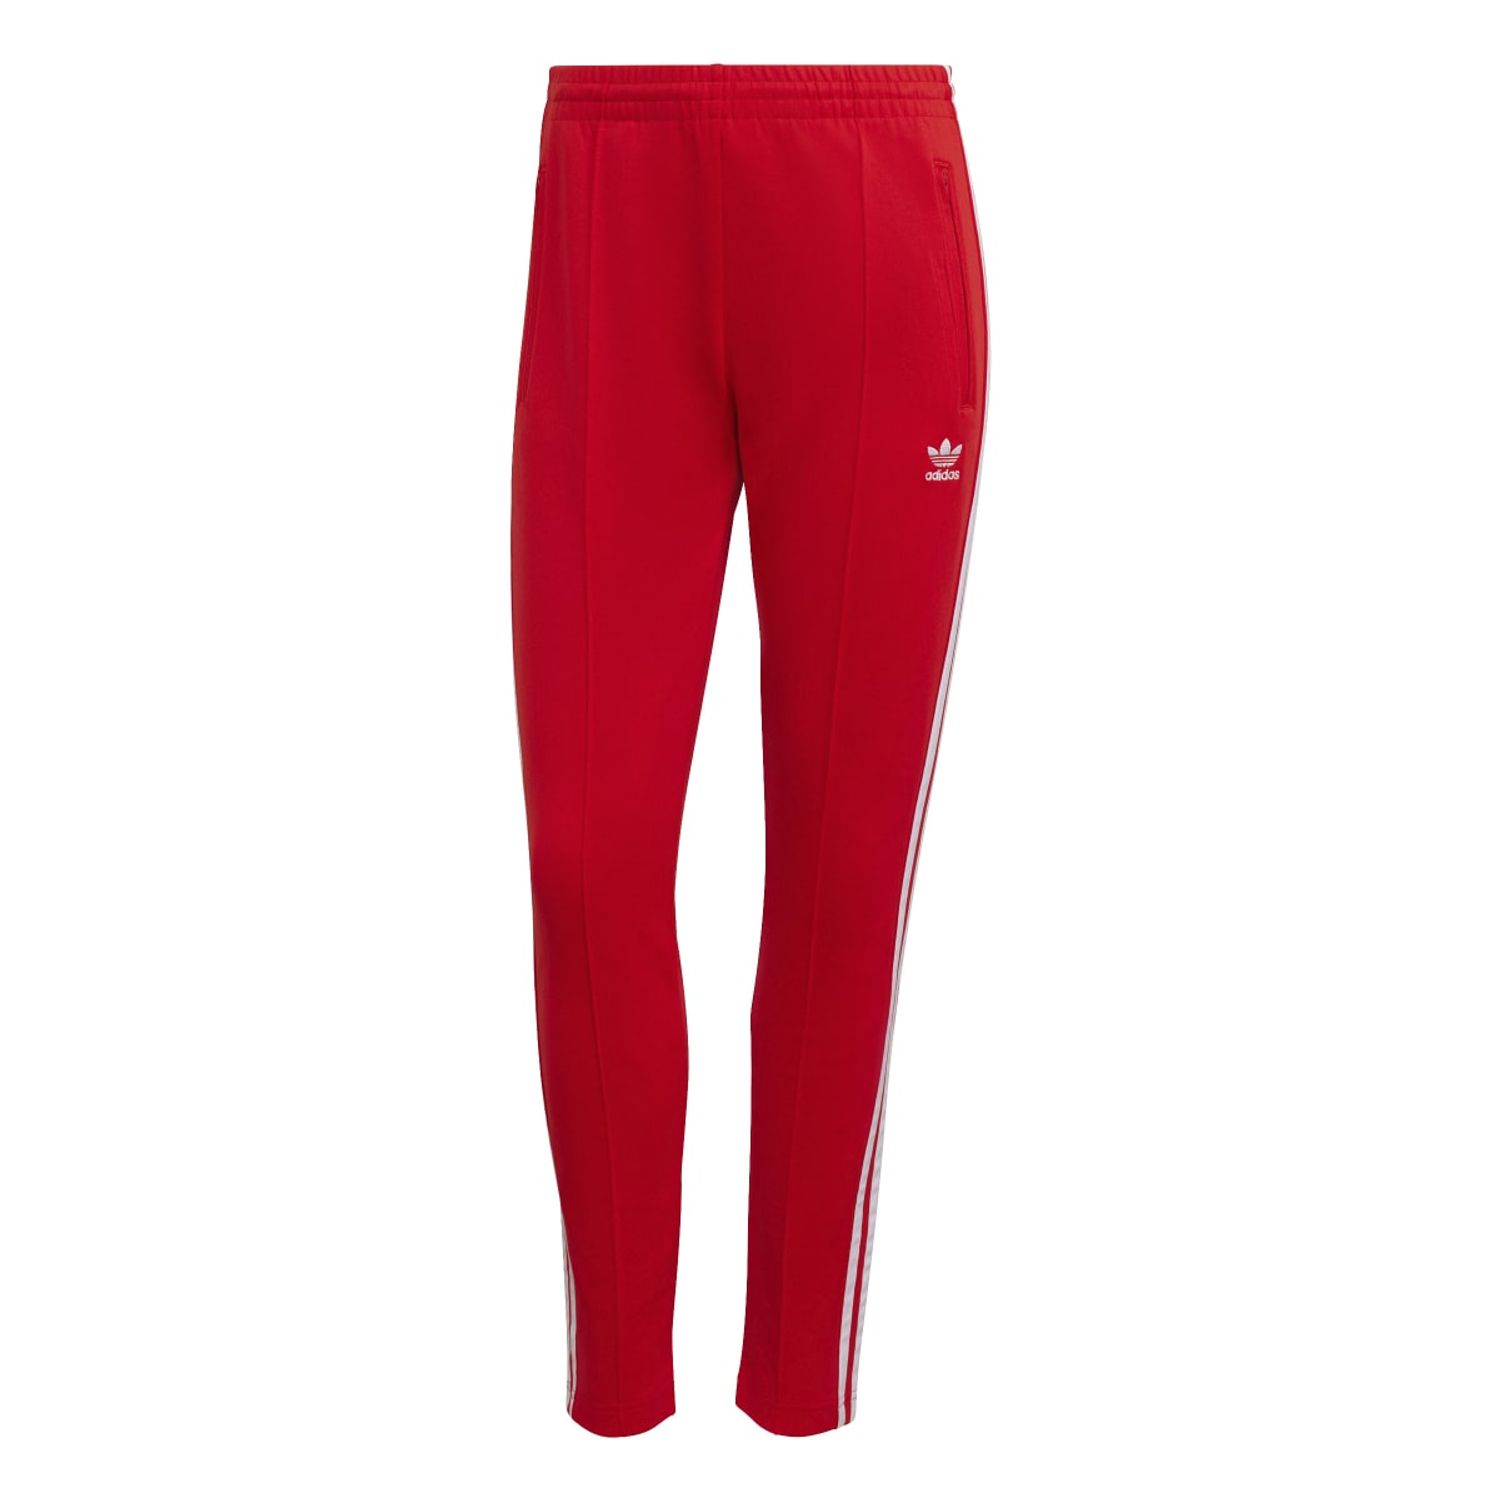 Red adidas Originals Womens Primeblue SST Track Pants - Get The Label